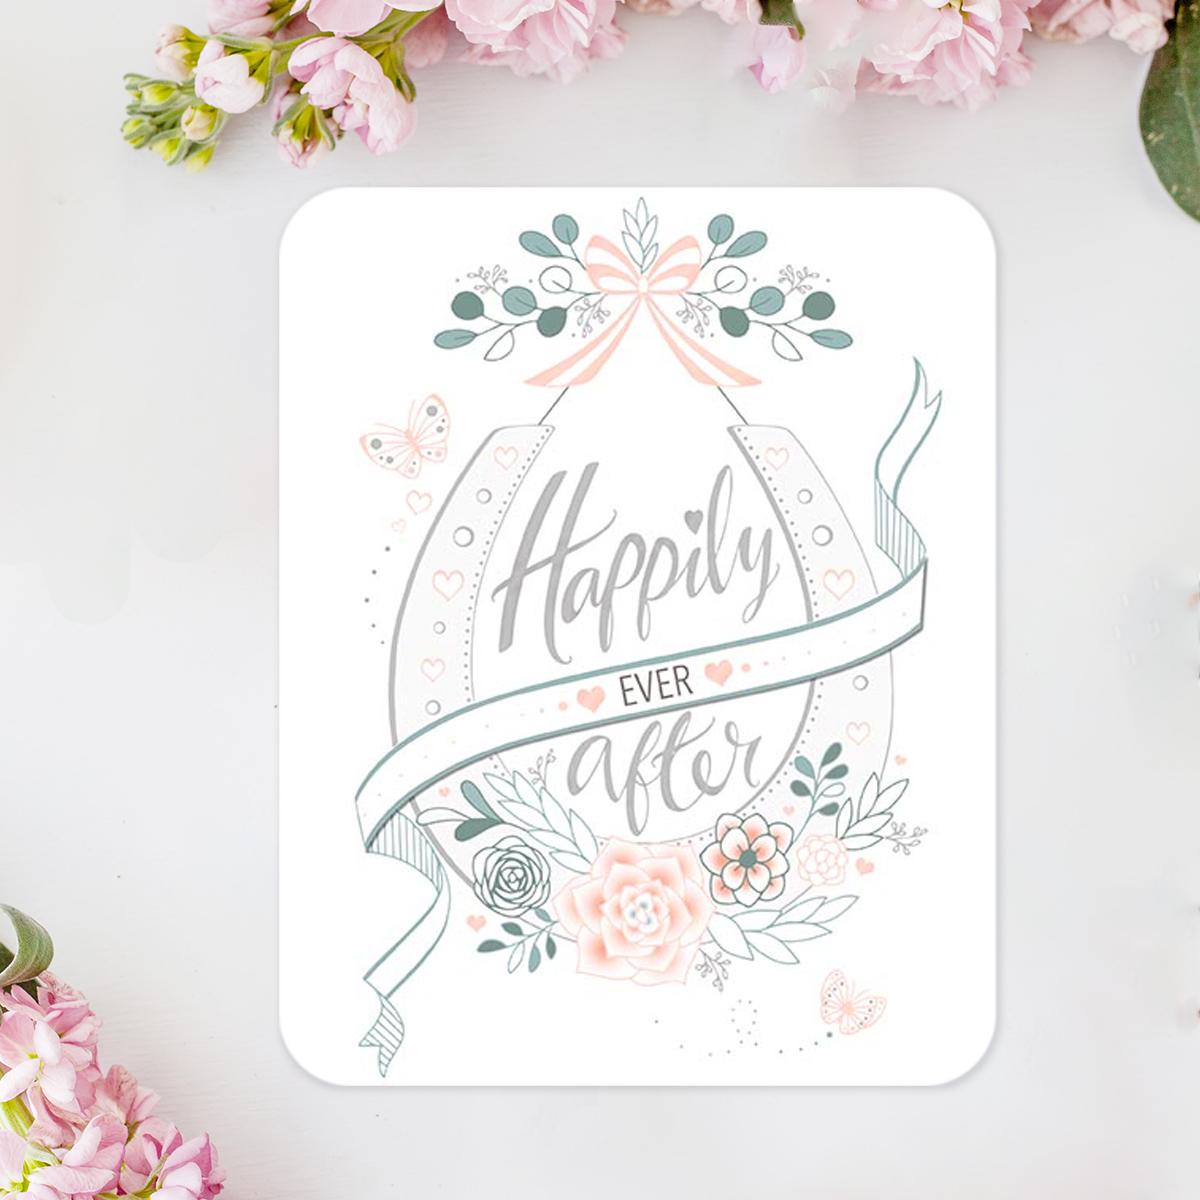 Happily Ever After Horseshoe Card Front Image